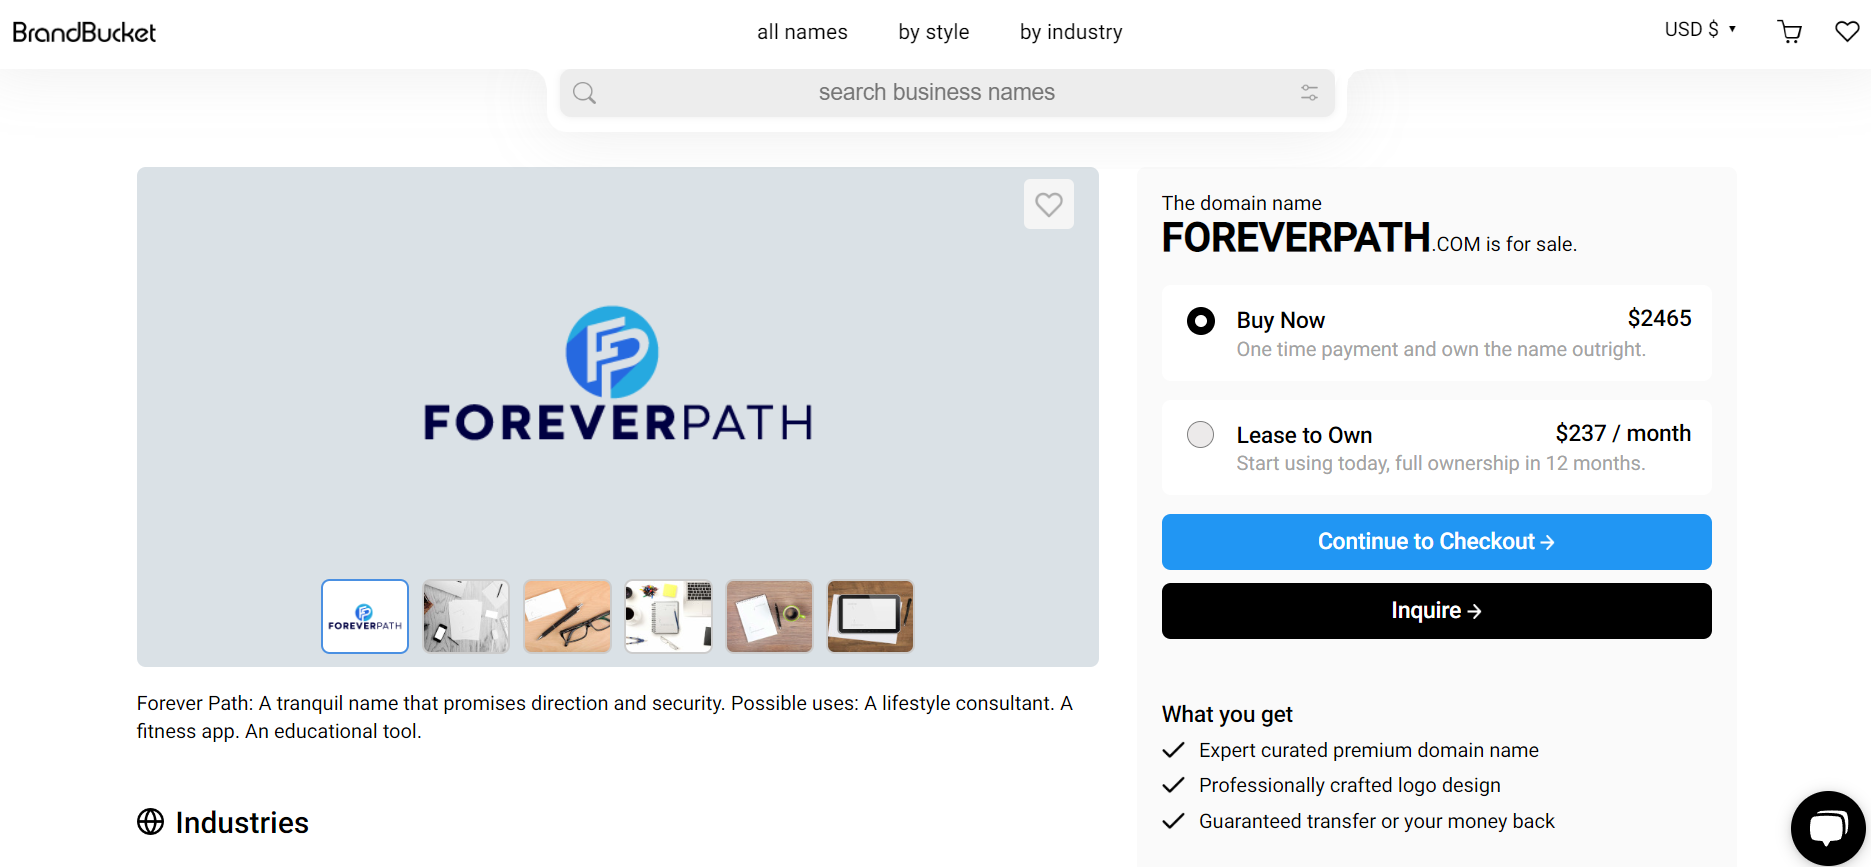 Foreverpath